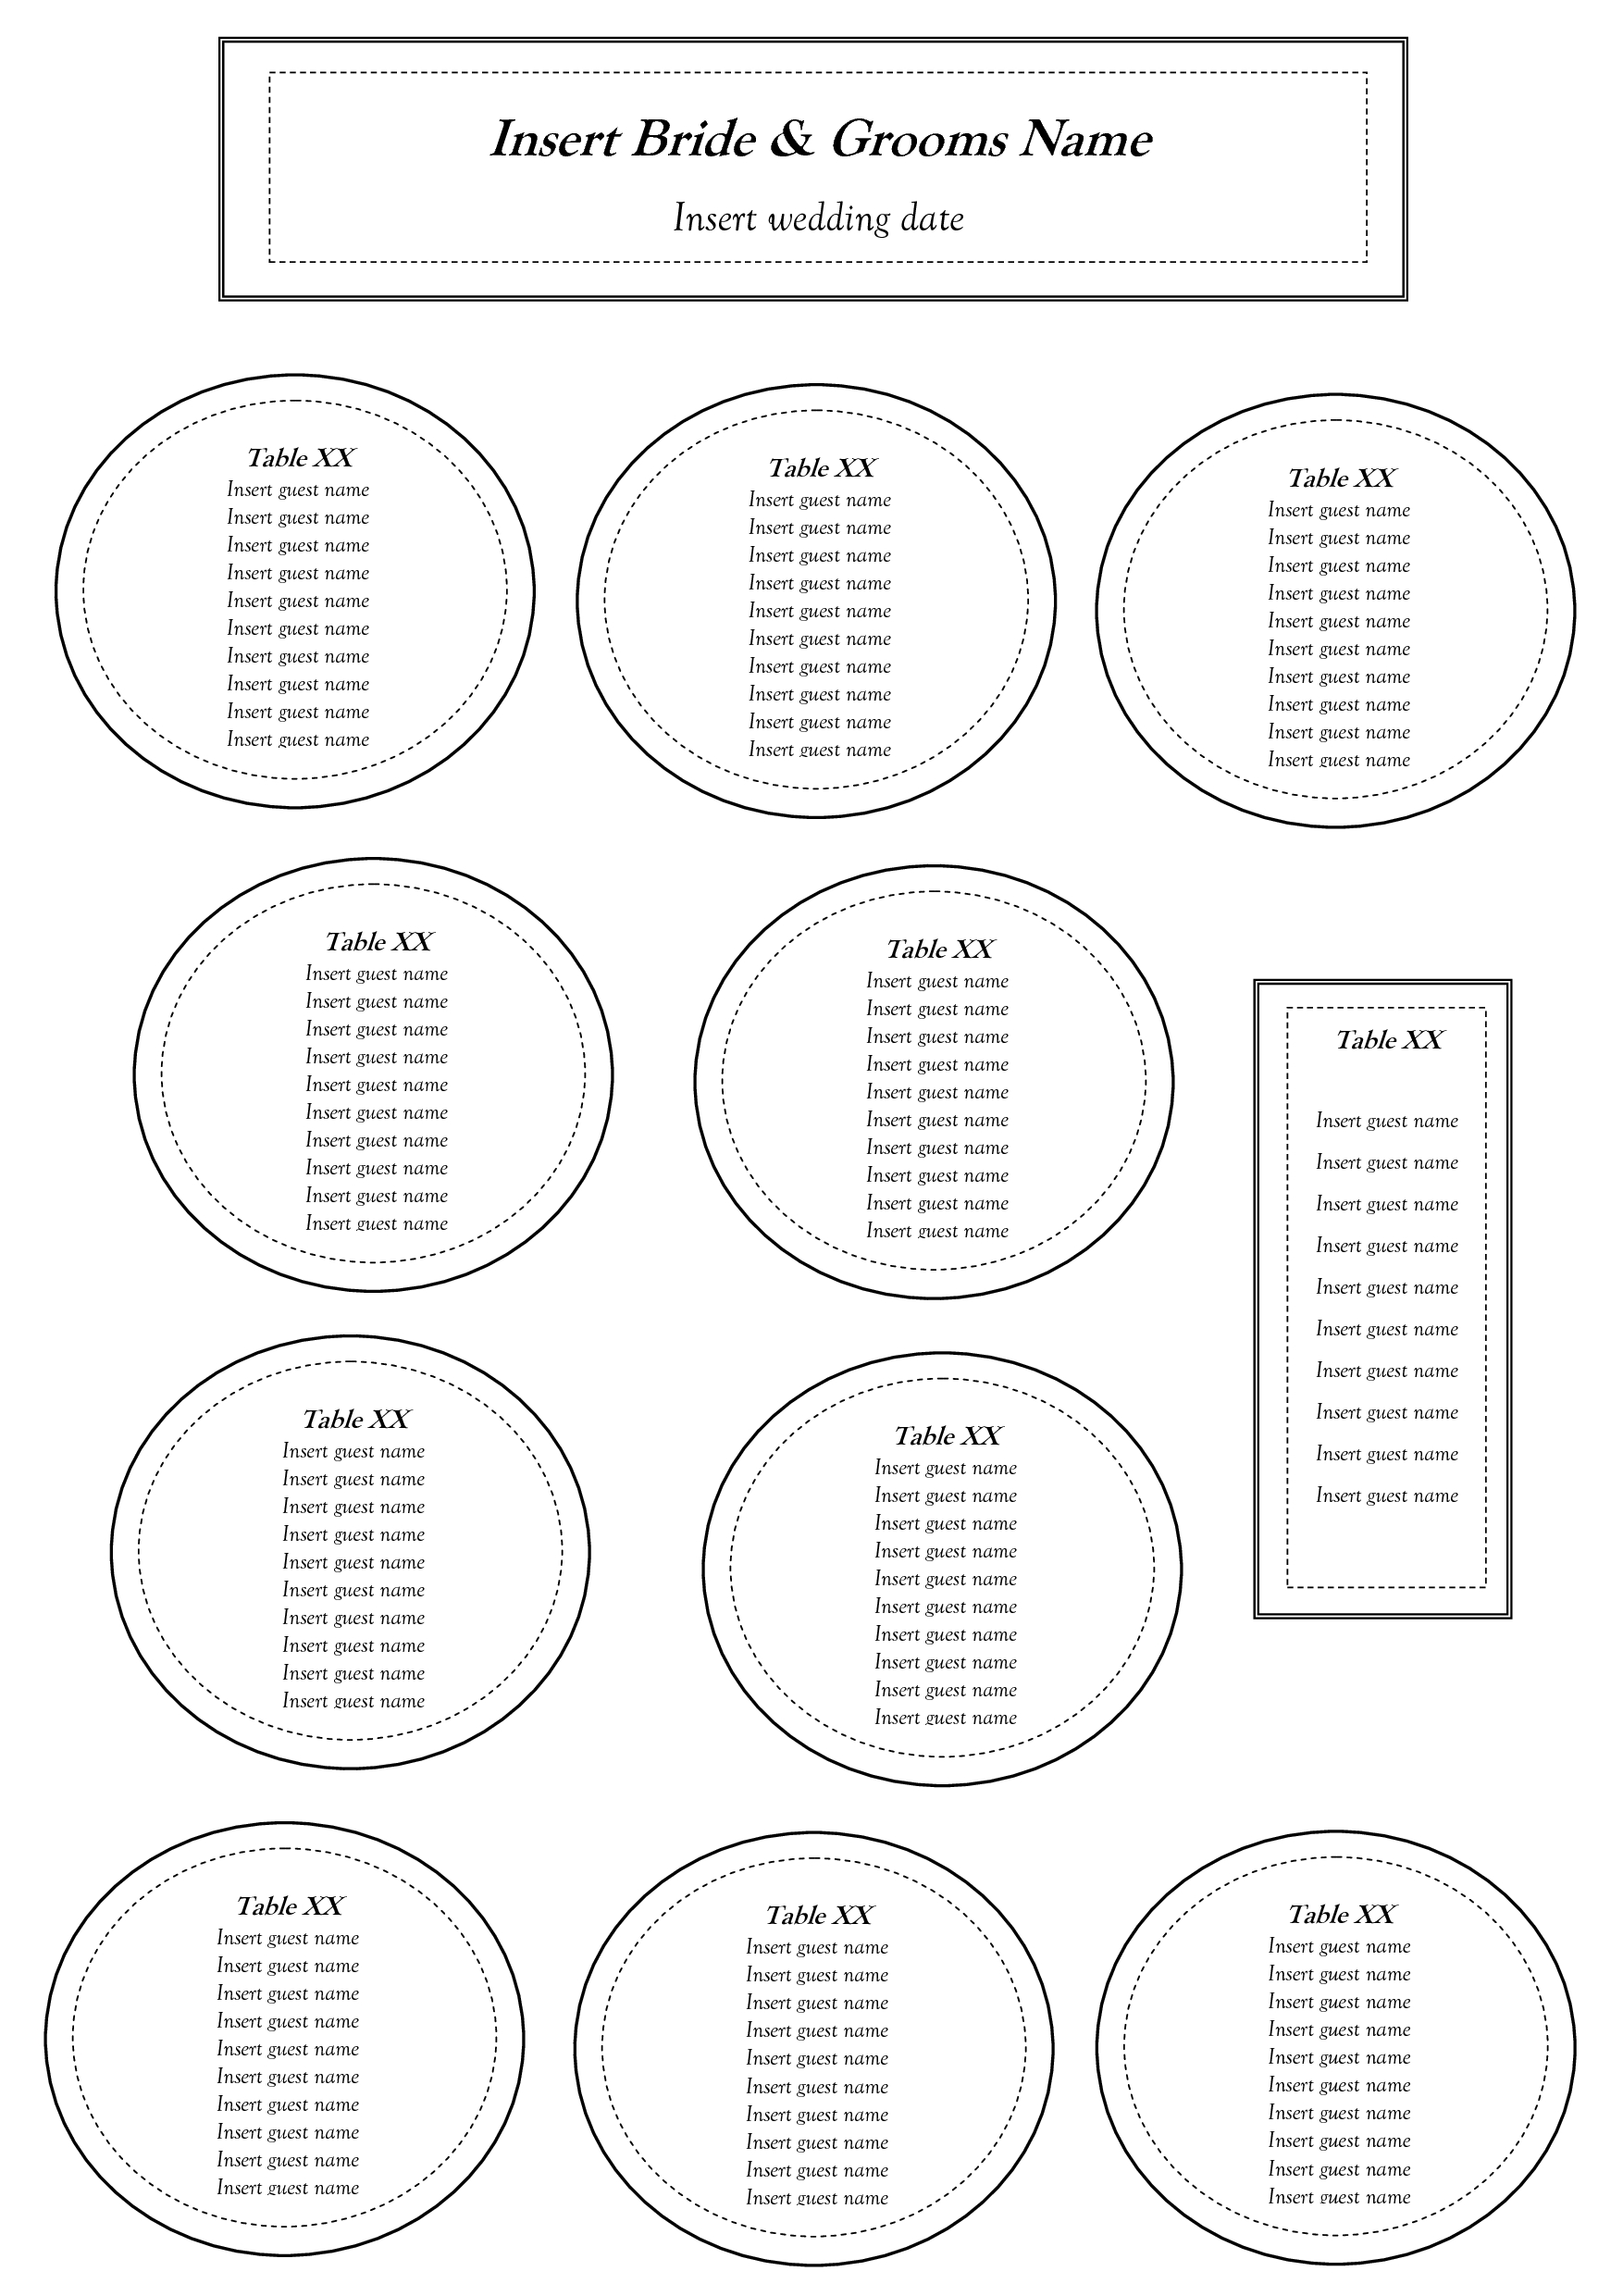 Free Table Seating Chart Template | Seating Charts | Pinterest - Free Printable Wedding Seating Chart Template